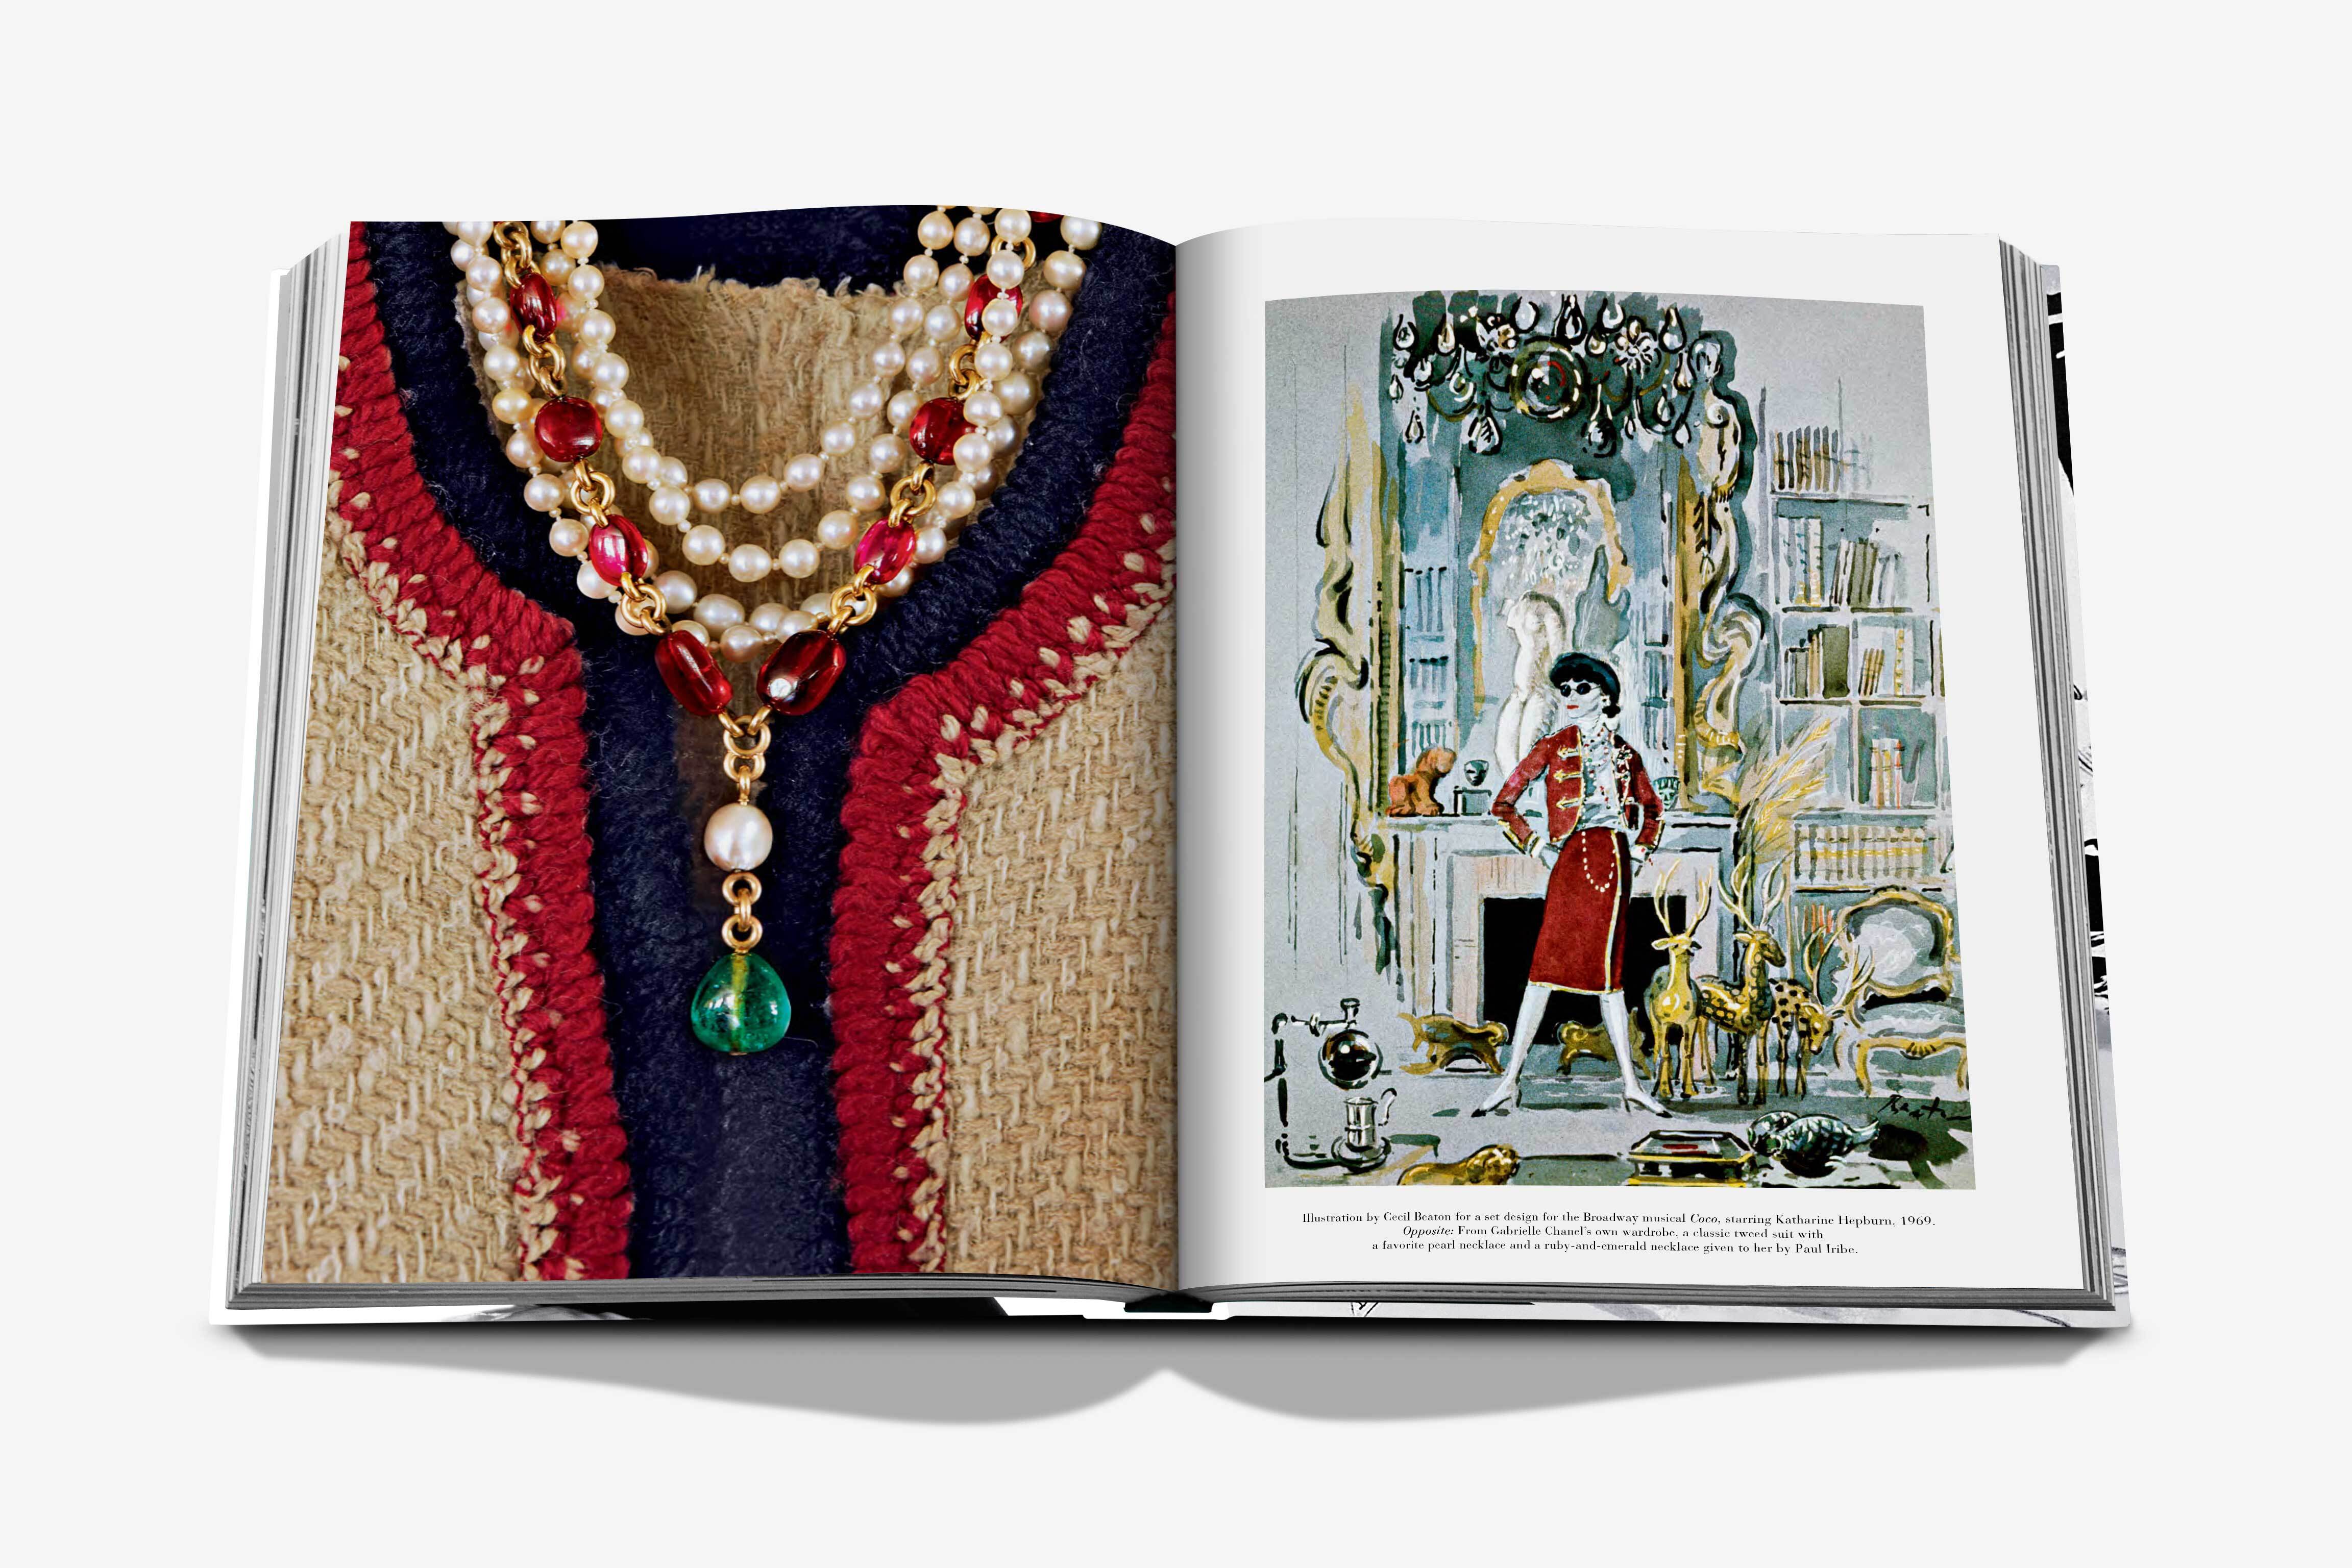 Chanel: The Legend of an Icon Coffee Table Book | ASSOULINE